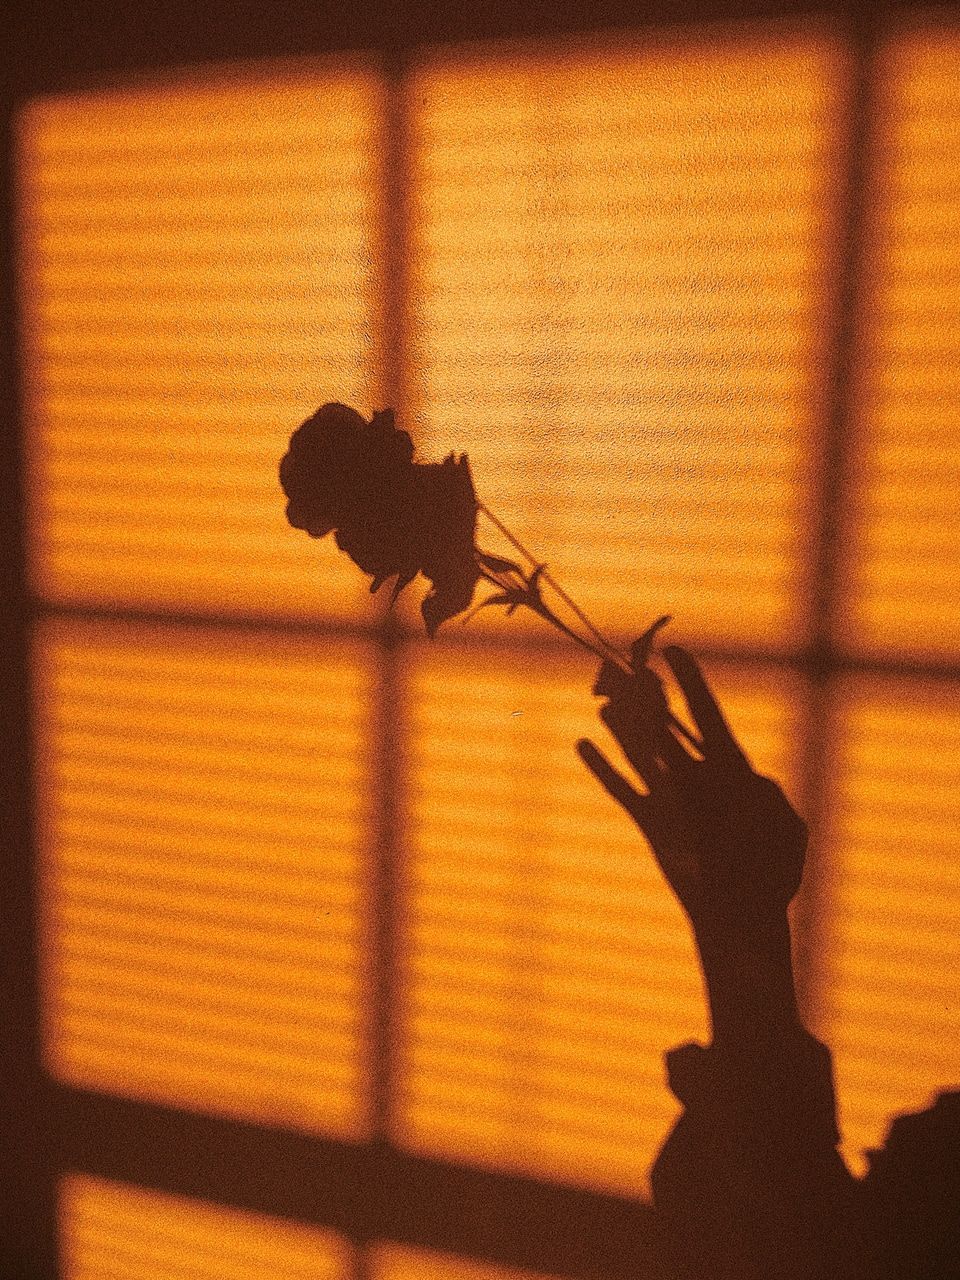 A shadow of a hand holding a rose in front of a window. - Shadow